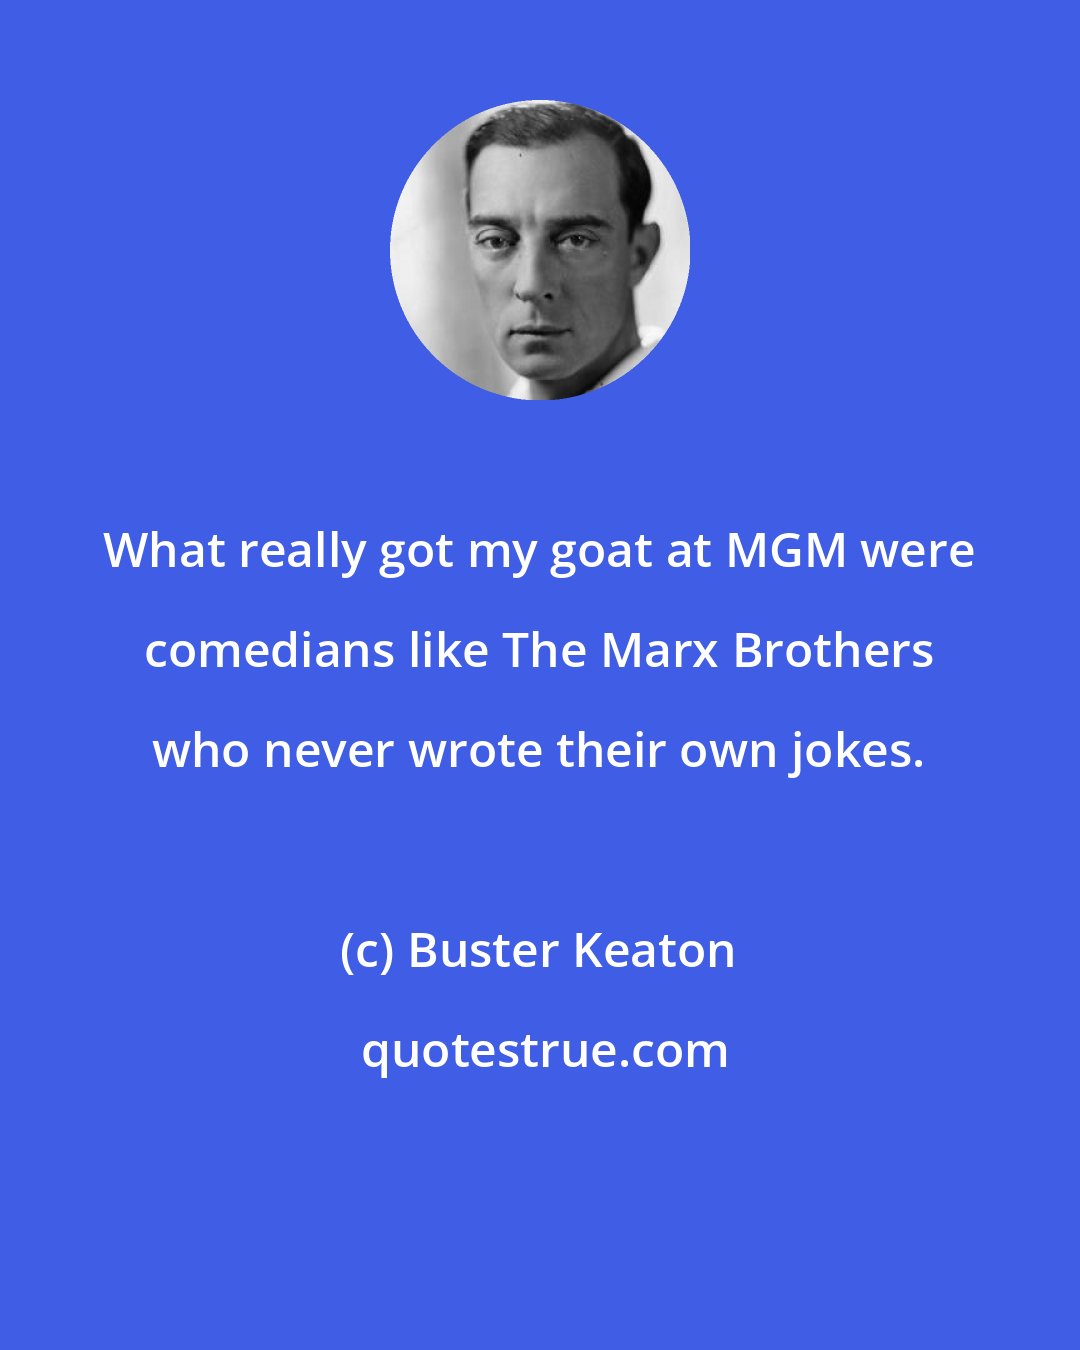 Buster Keaton: What really got my goat at MGM were comedians like The Marx Brothers who never wrote their own jokes.